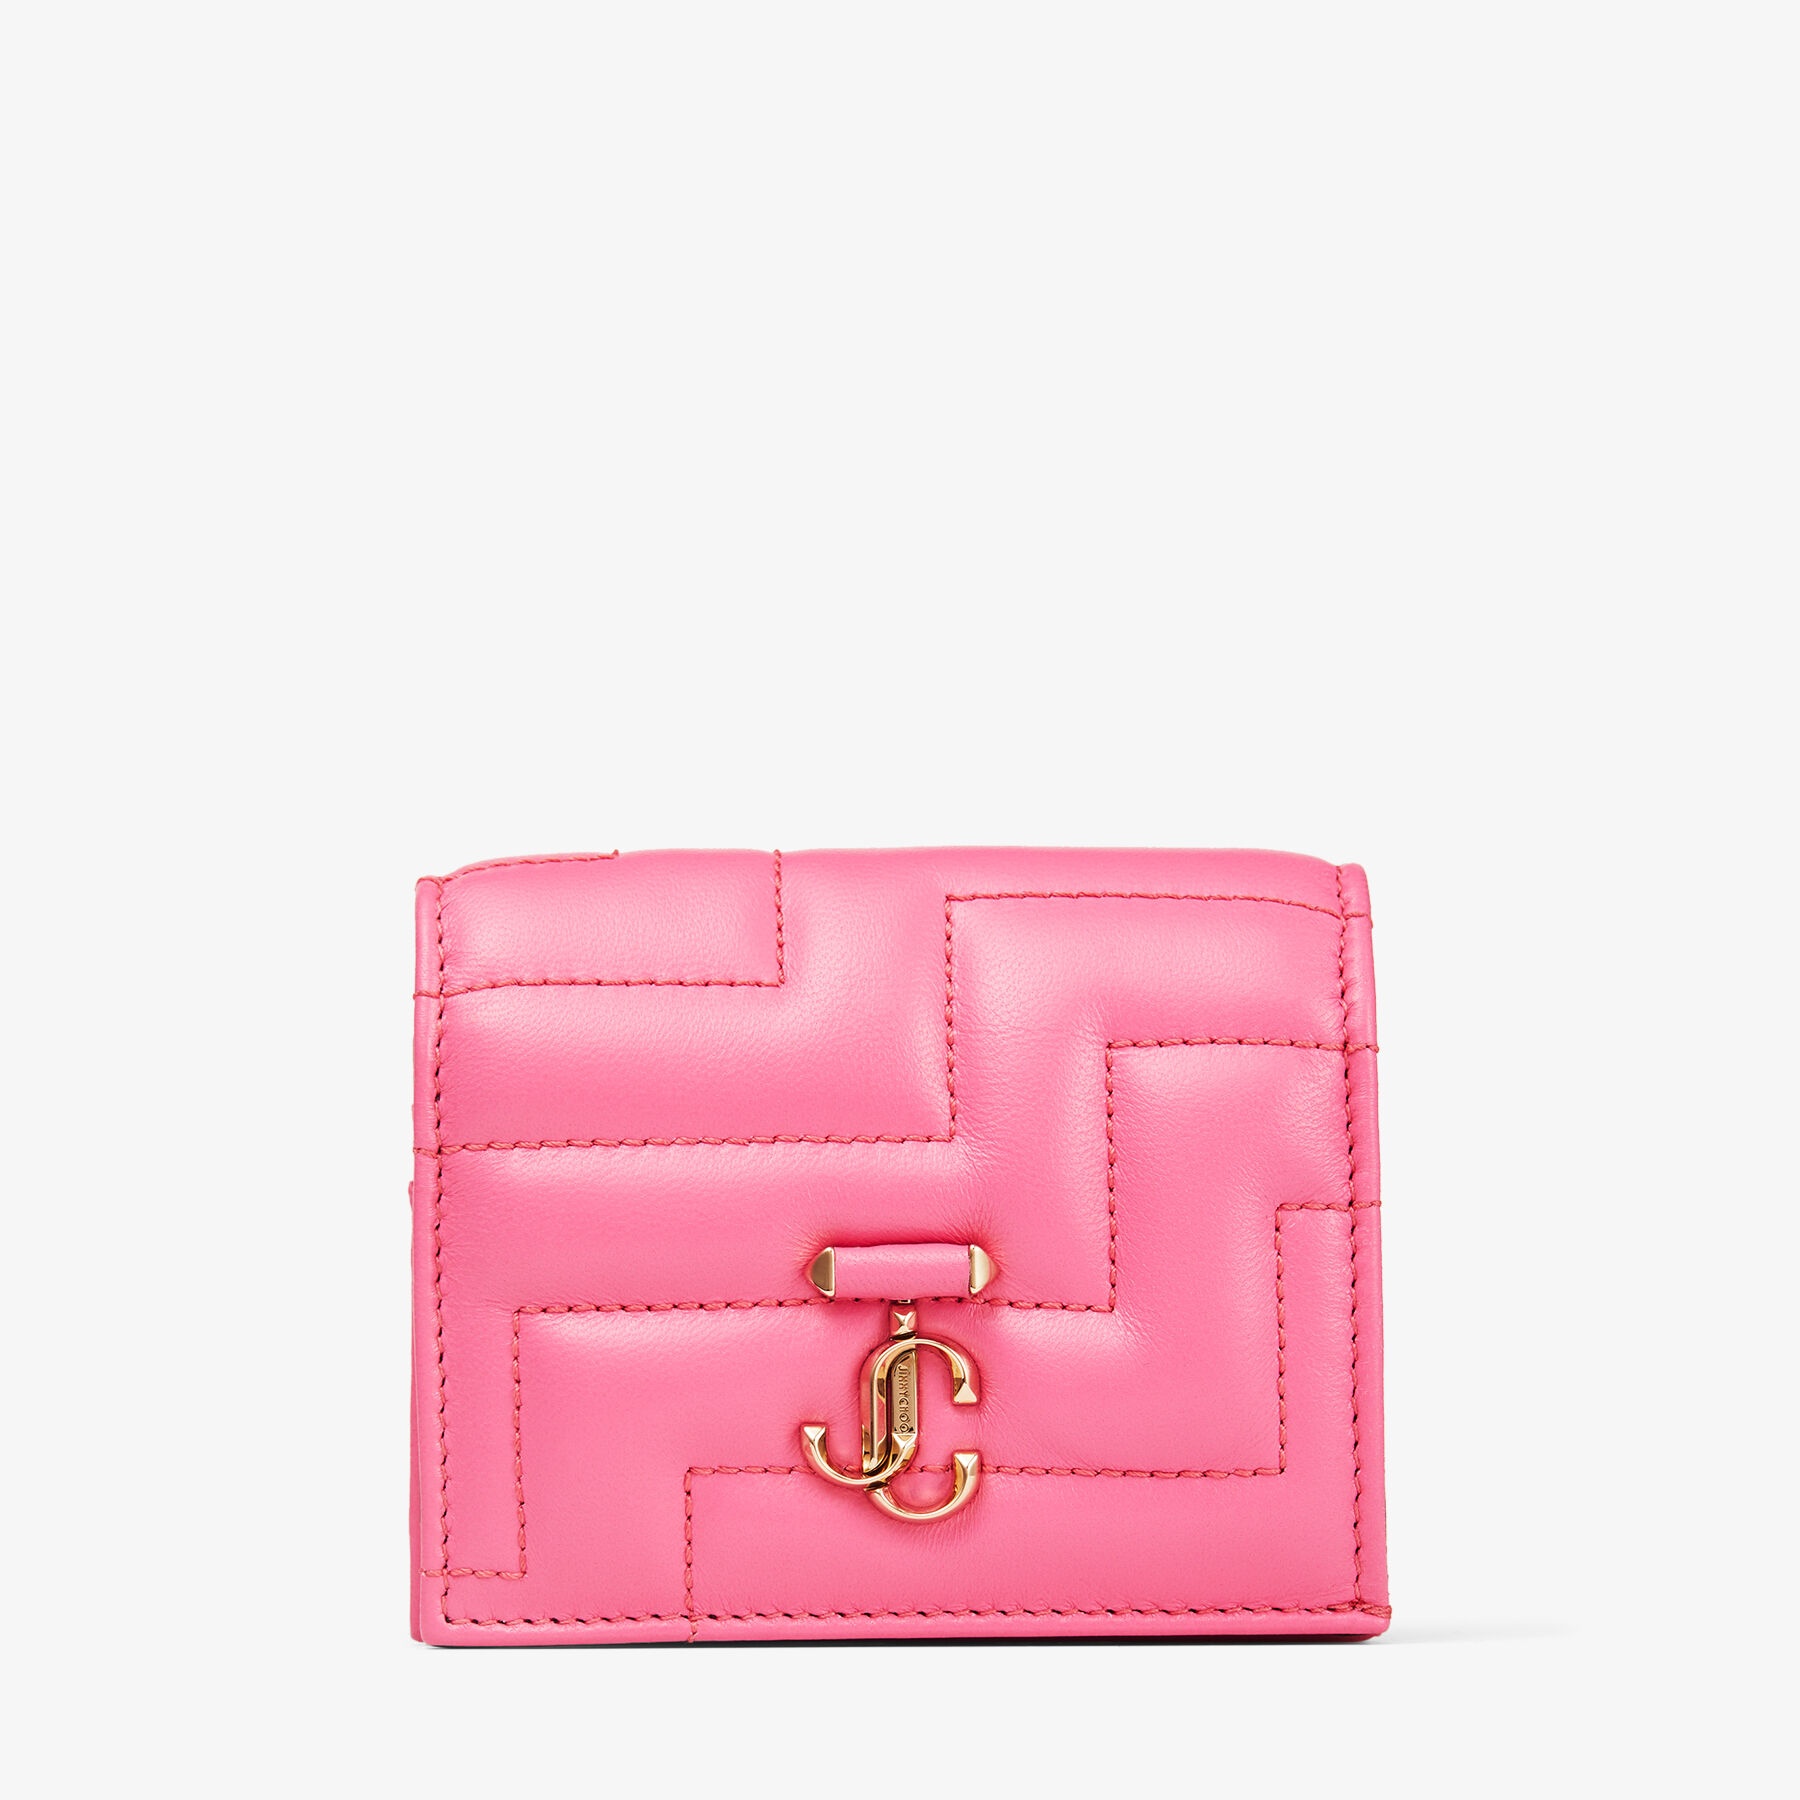 Hanne
Candy Pink Avenue Nappa Leather Wallet with Light Gold JC Emblem - 1